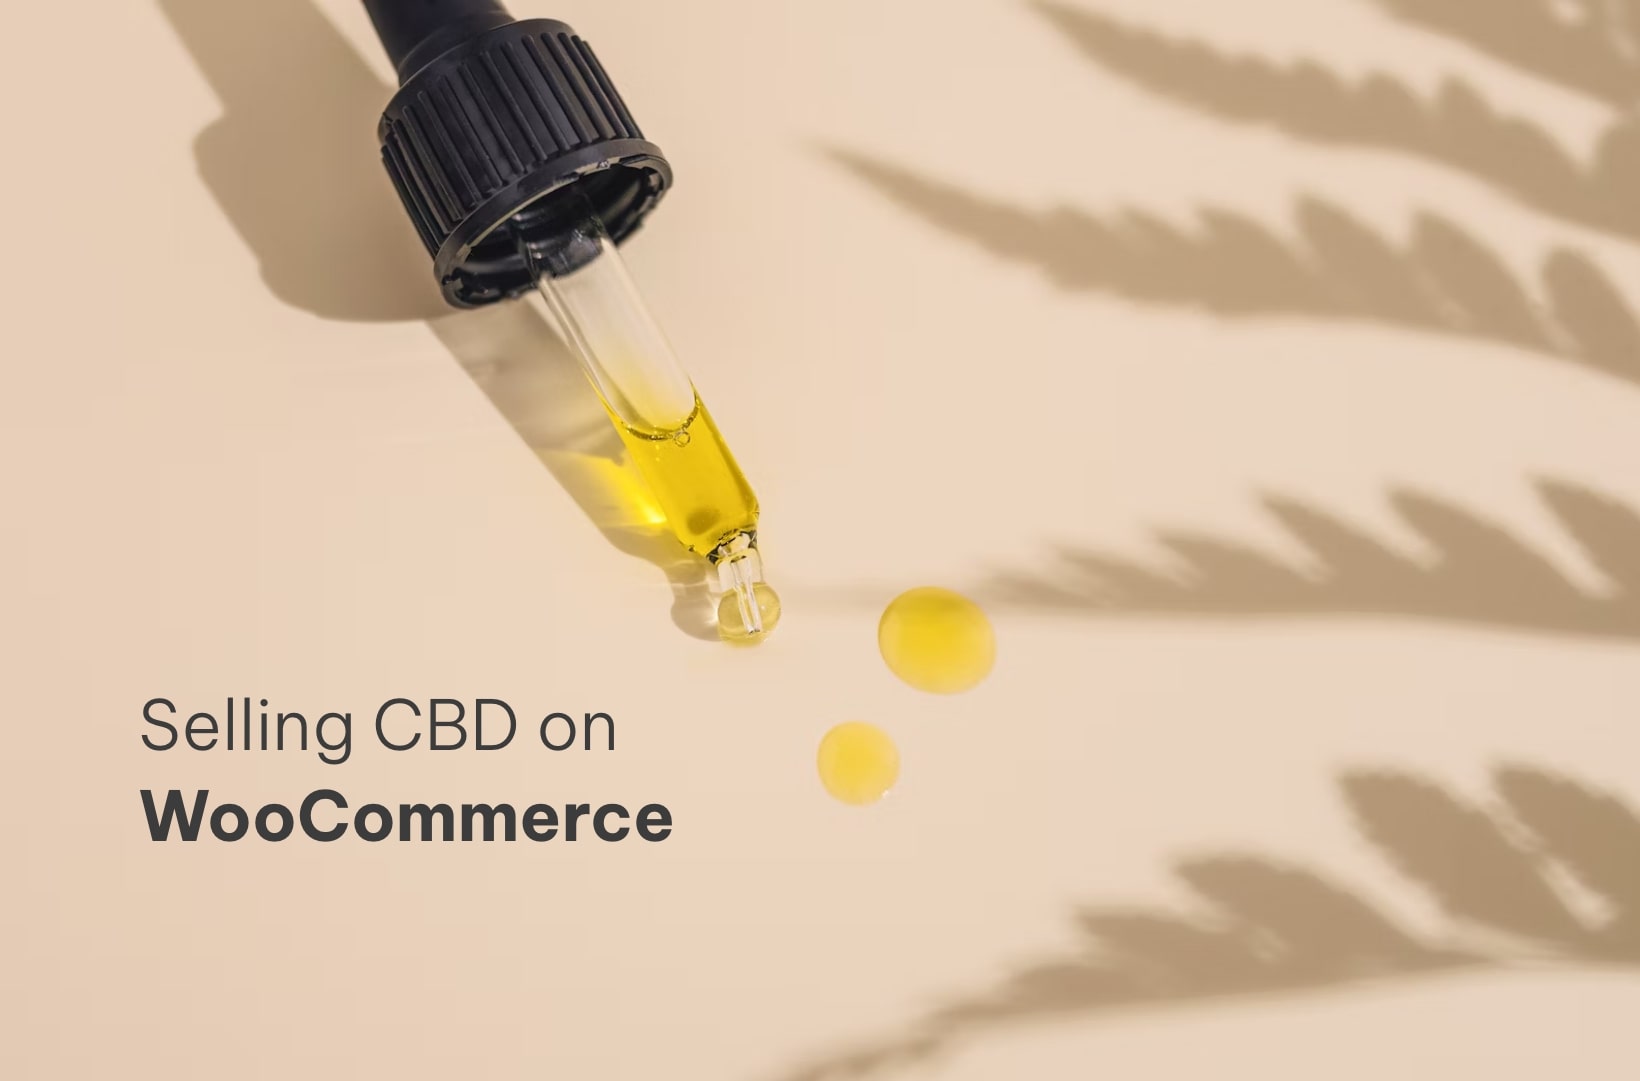 CBD on WooCommerce: Selling Hemp-Derived Products Legally